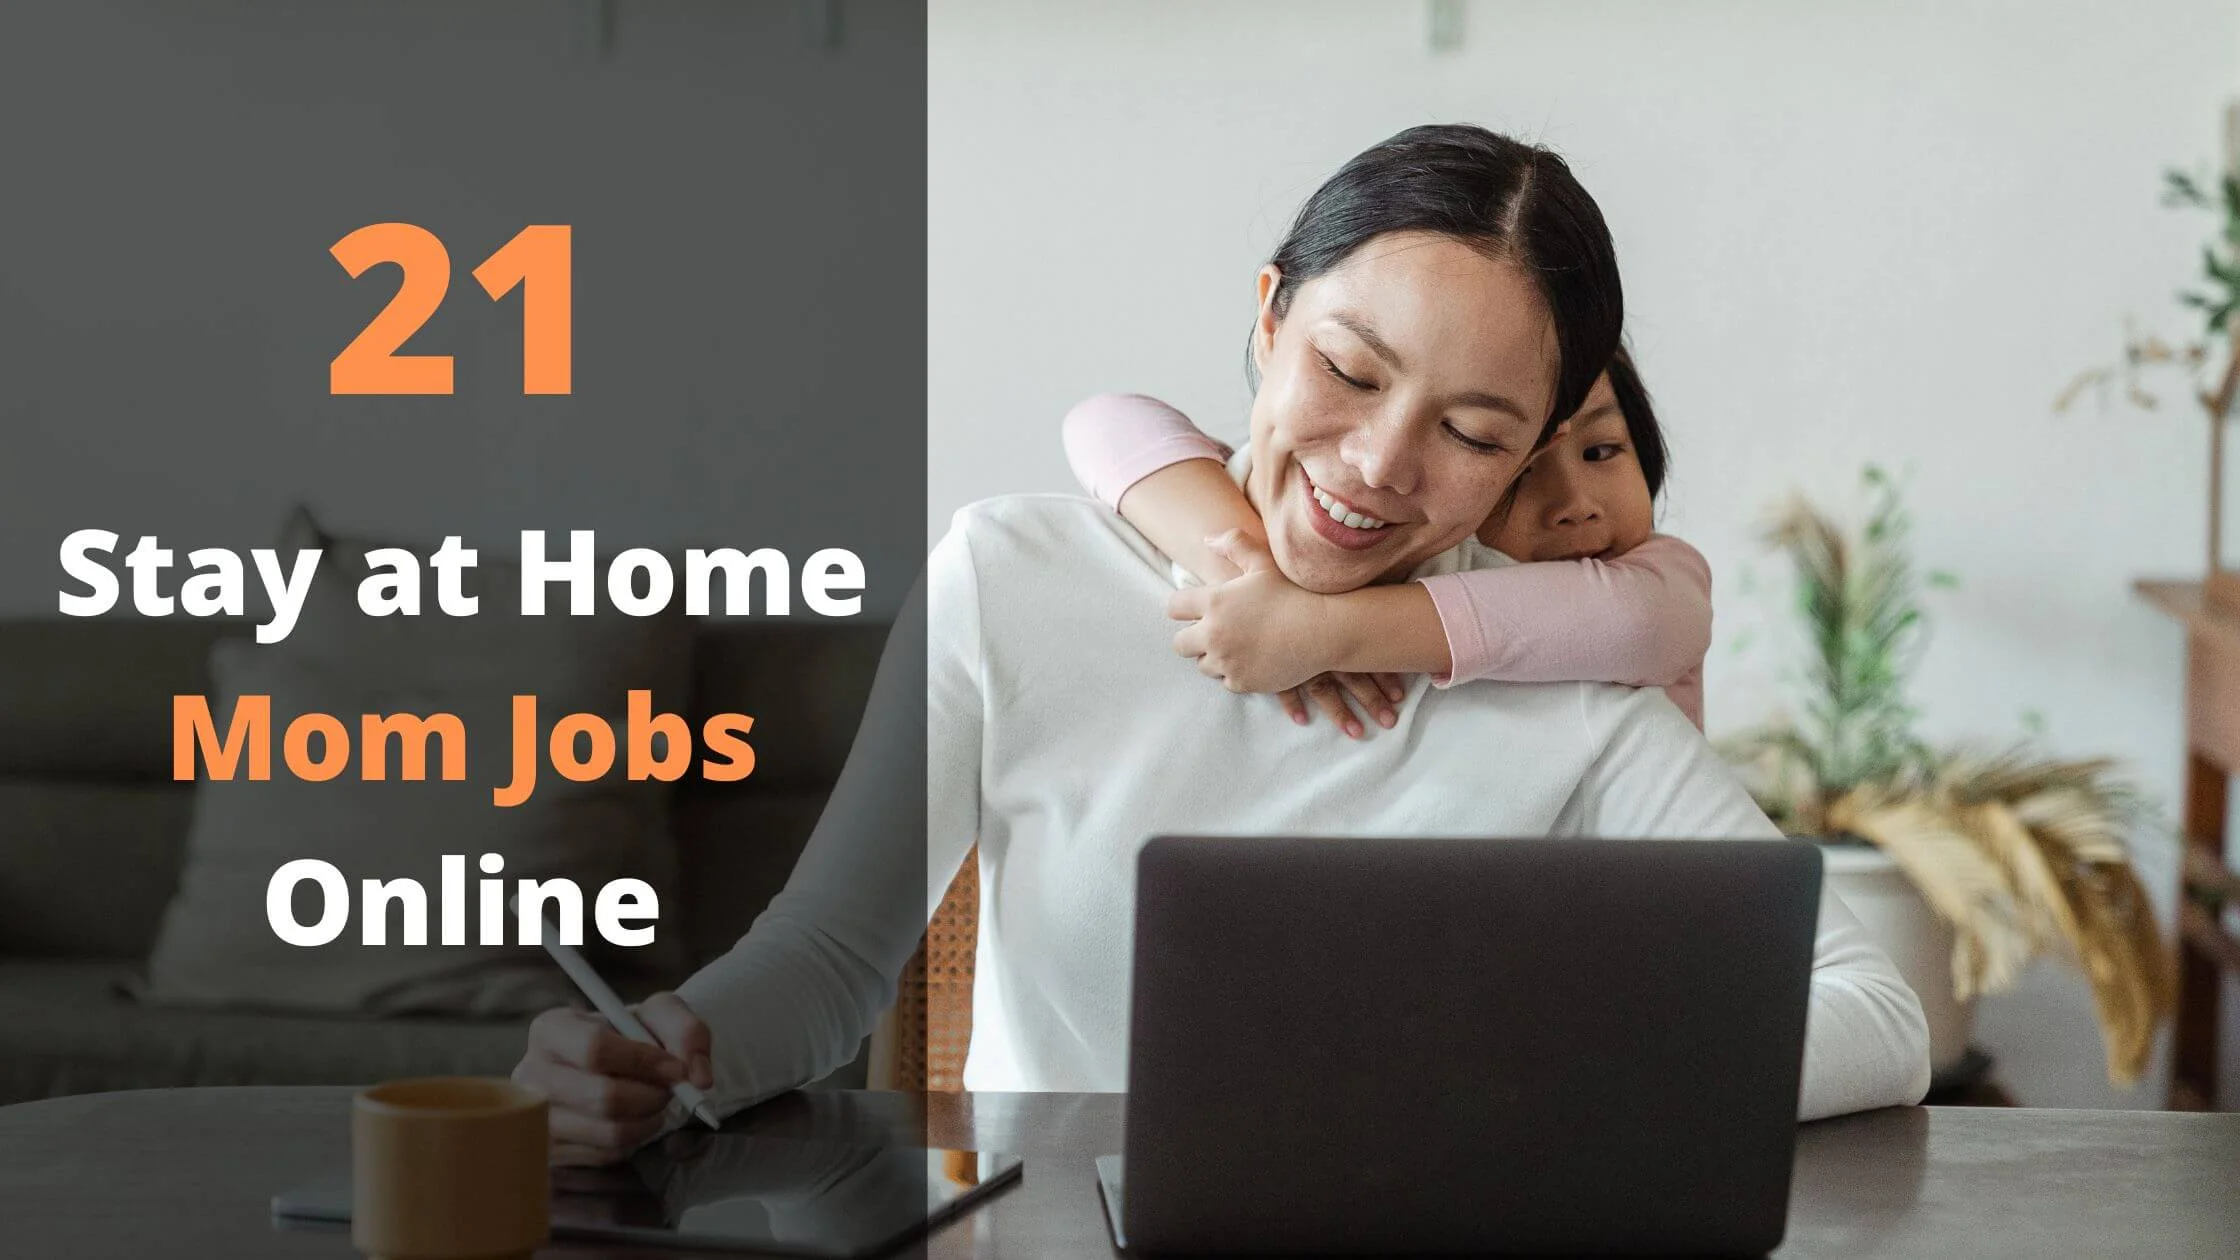 Stay at Home Mom Jobs Online